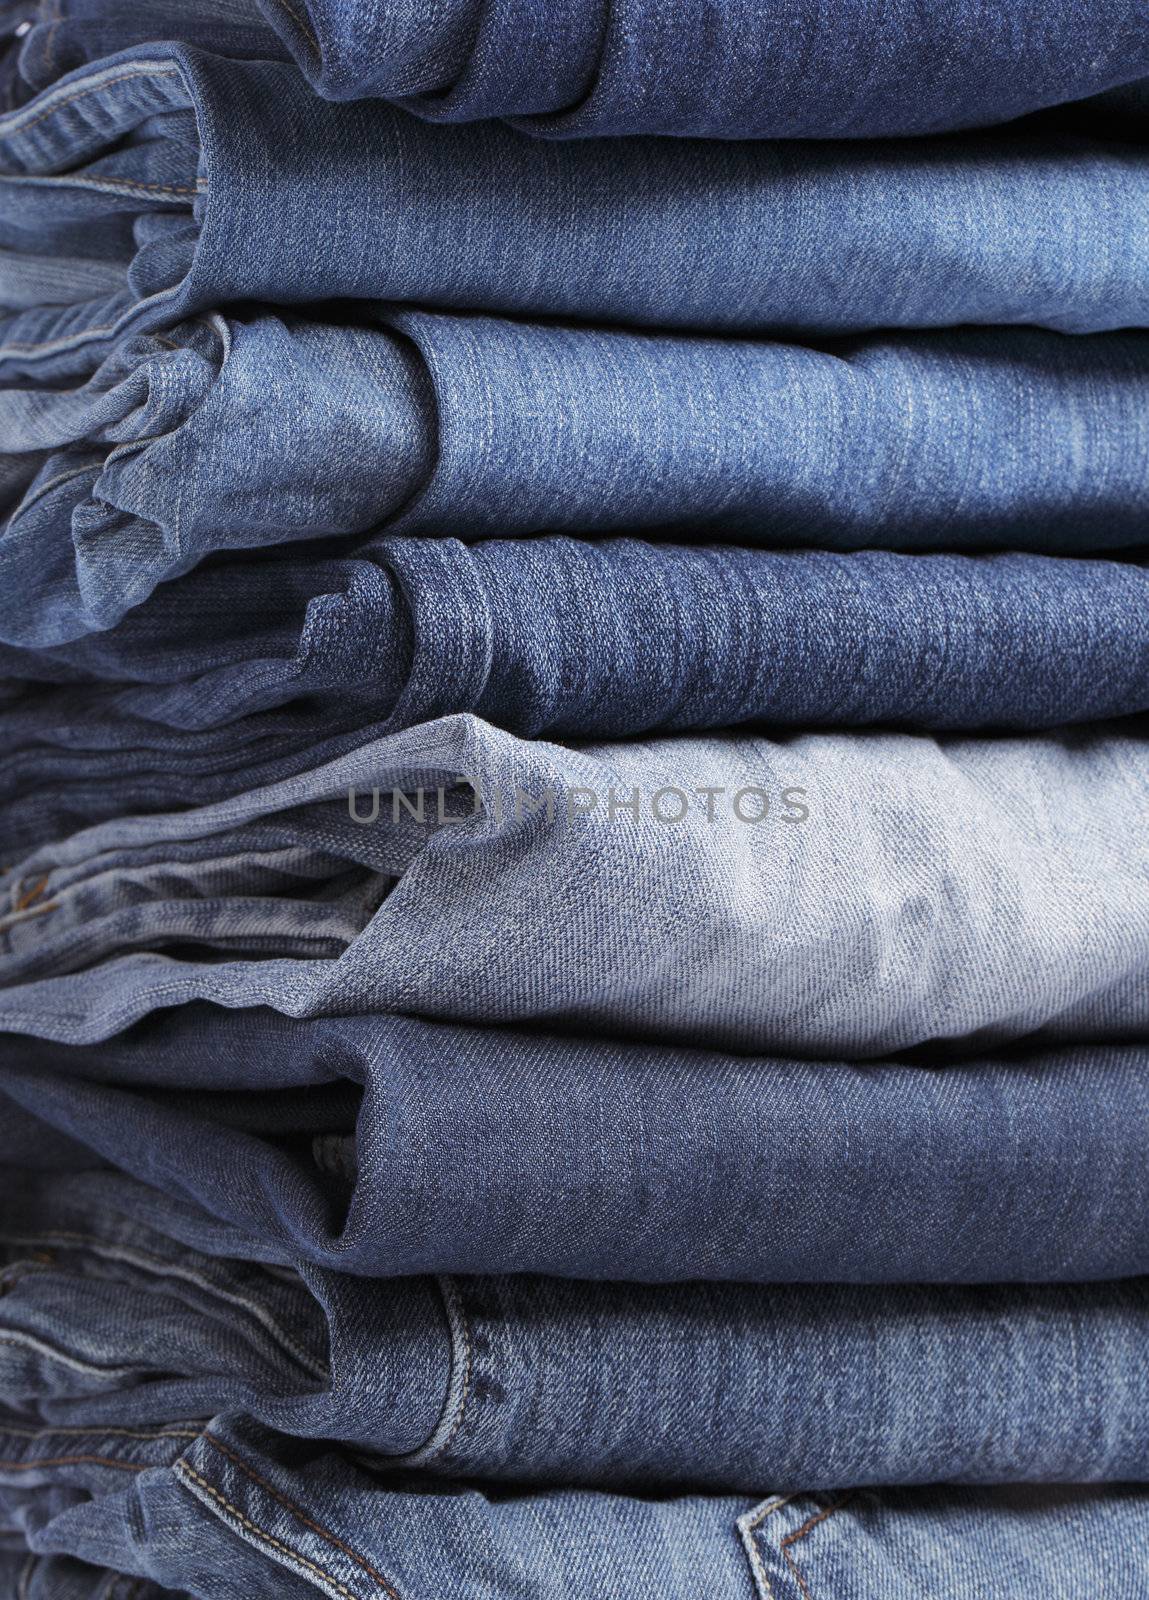 Different shades of blue jeans stacked